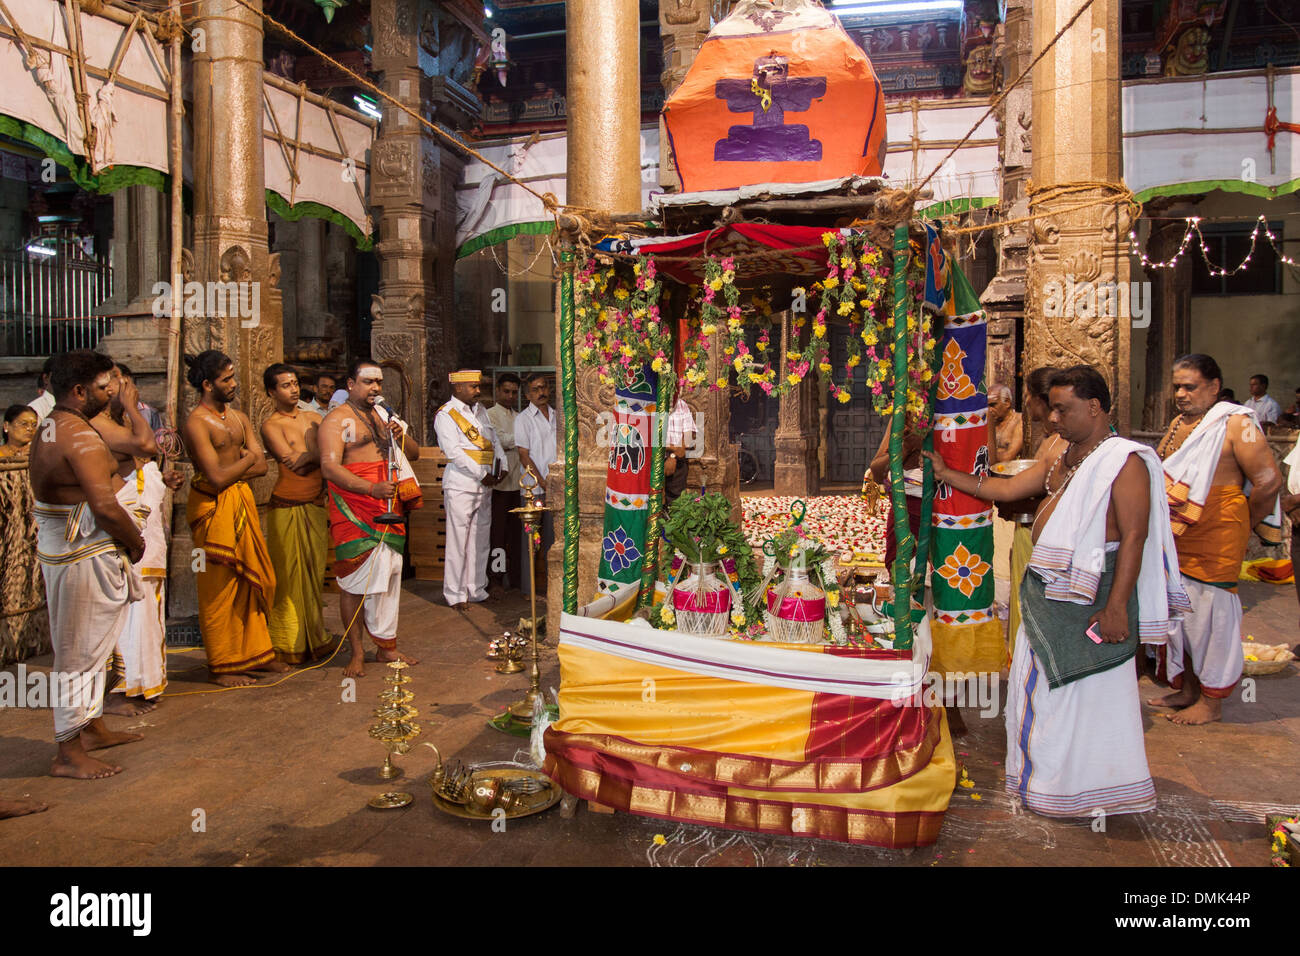 BRAHMANS LEADING A CEREMONY INSIDE THE TEMPLE OF MINAKSHI, STATE OF TAMIL NADU, IINDIA Stock Photo